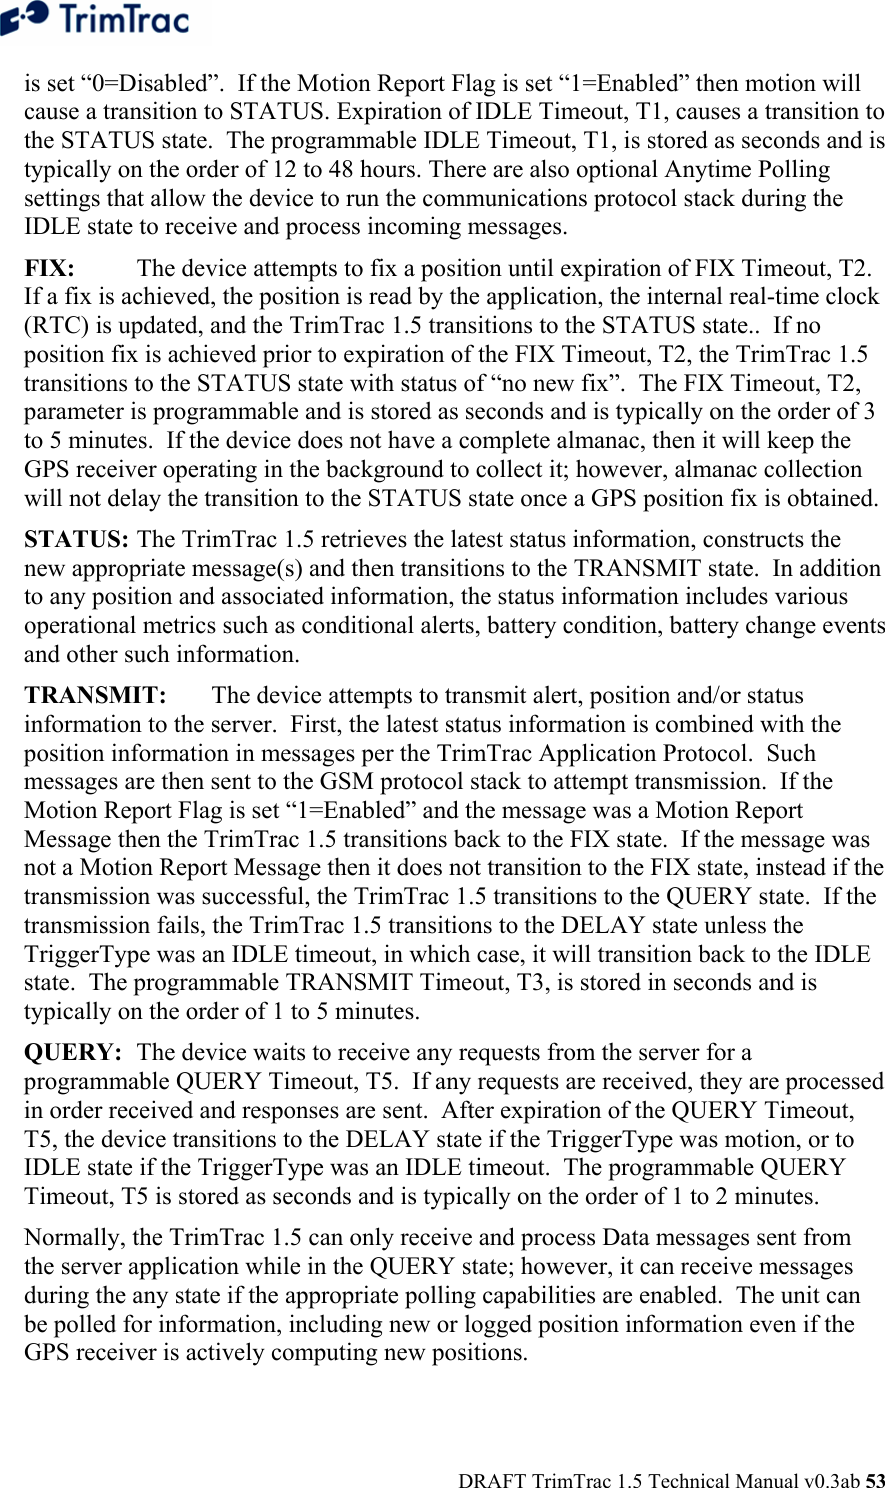  DRAFT TrimTrac 1.5 Technical Manual v0.3ab 53 is set “0=Disabled”.  If the Motion Report Flag is set “1=Enabled” then motion will cause a transition to STATUS. Expiration of IDLE Timeout, T1, causes a transition to the STATUS state.  The programmable IDLE Timeout, T1, is stored as seconds and is typically on the order of 12 to 48 hours. There are also optional Anytime Polling settings that allow the device to run the communications protocol stack during the IDLE state to receive and process incoming messages. FIX:  The device attempts to fix a position until expiration of FIX Timeout, T2.  If a fix is achieved, the position is read by the application, the internal real-time clock (RTC) is updated, and the TrimTrac 1.5 transitions to the STATUS state..  If no position fix is achieved prior to expiration of the FIX Timeout, T2, the TrimTrac 1.5 transitions to the STATUS state with status of “no new fix”.  The FIX Timeout, T2, parameter is programmable and is stored as seconds and is typically on the order of 3 to 5 minutes.  If the device does not have a complete almanac, then it will keep the GPS receiver operating in the background to collect it; however, almanac collection will not delay the transition to the STATUS state once a GPS position fix is obtained. STATUS: The TrimTrac 1.5 retrieves the latest status information, constructs the new appropriate message(s) and then transitions to the TRANSMIT state.  In addition to any position and associated information, the status information includes various operational metrics such as conditional alerts, battery condition, battery change events and other such information. TRANSMIT:  The device attempts to transmit alert, position and/or status information to the server.  First, the latest status information is combined with the position information in messages per the TrimTrac Application Protocol.  Such messages are then sent to the GSM protocol stack to attempt transmission.  If the Motion Report Flag is set “1=Enabled” and the message was a Motion Report Message then the TrimTrac 1.5 transitions back to the FIX state.  If the message was not a Motion Report Message then it does not transition to the FIX state, instead if the transmission was successful, the TrimTrac 1.5 transitions to the QUERY state.  If the transmission fails, the TrimTrac 1.5 transitions to the DELAY state unless the TriggerType was an IDLE timeout, in which case, it will transition back to the IDLE state.  The programmable TRANSMIT Timeout, T3, is stored in seconds and is typically on the order of 1 to 5 minutes. QUERY:  The device waits to receive any requests from the server for a programmable QUERY Timeout, T5.  If any requests are received, they are processed in order received and responses are sent.  After expiration of the QUERY Timeout, T5, the device transitions to the DELAY state if the TriggerType was motion, or to IDLE state if the TriggerType was an IDLE timeout.  The programmable QUERY Timeout, T5 is stored as seconds and is typically on the order of 1 to 2 minutes. Normally, the TrimTrac 1.5 can only receive and process Data messages sent from the server application while in the QUERY state; however, it can receive messages during the any state if the appropriate polling capabilities are enabled.  The unit can be polled for information, including new or logged position information even if the GPS receiver is actively computing new positions. 